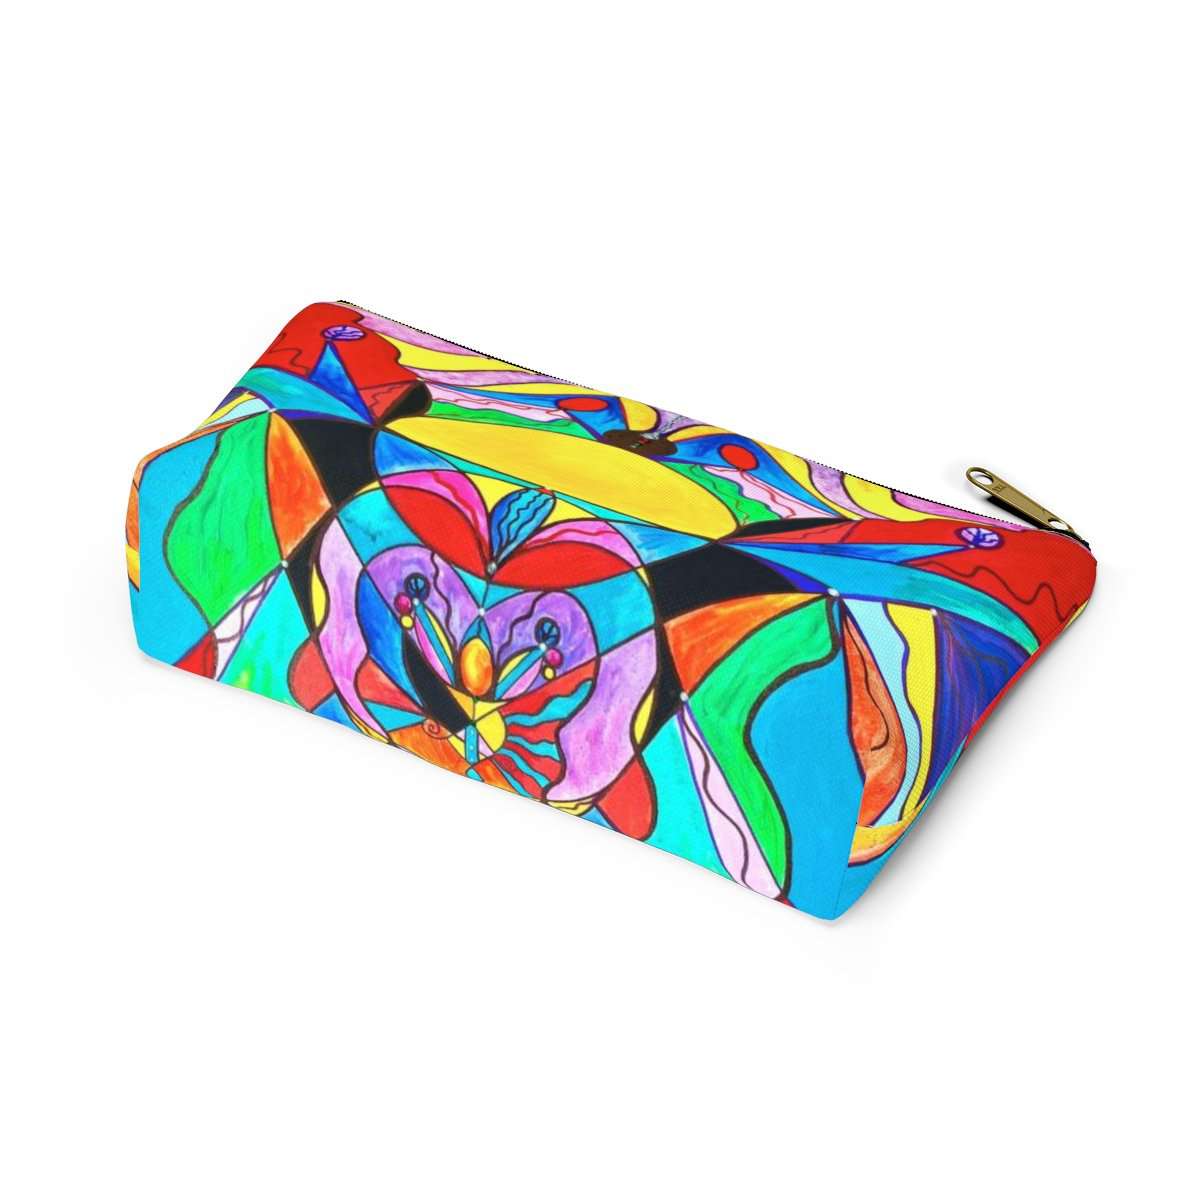 find-the-newest-arcturian-metamorphosis-grid-accessory-pouch-w-t-bottom-online-sale_6.jpg